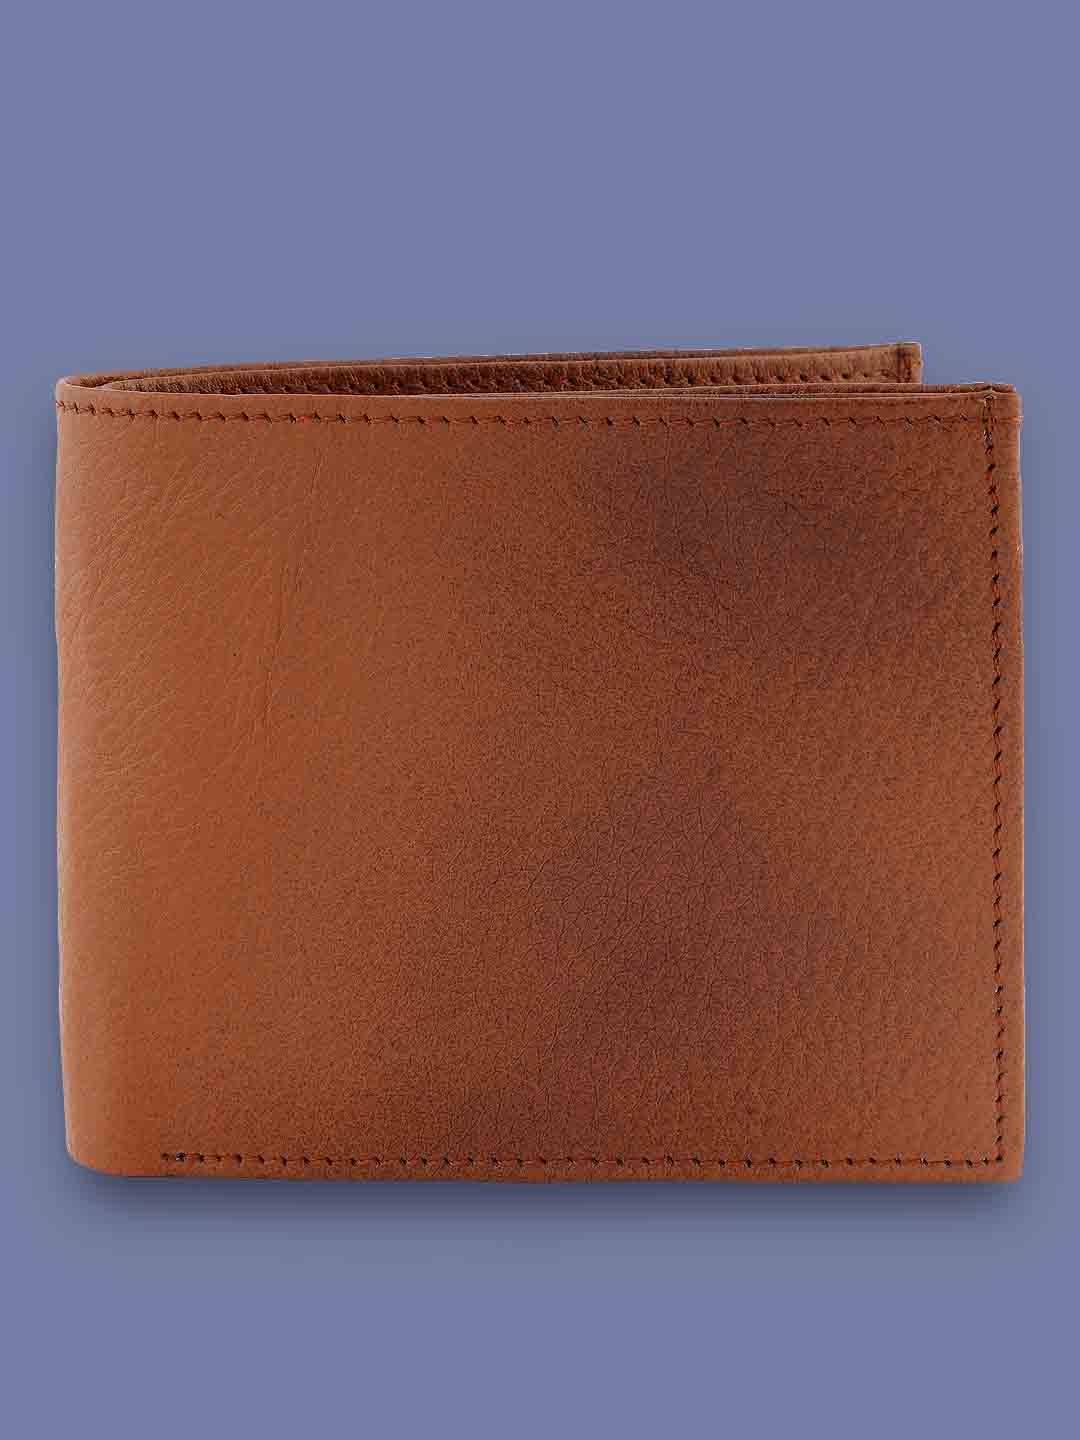 Buy or send Leatherano Amazing Looking Light Brown Color Purse for Men  Online